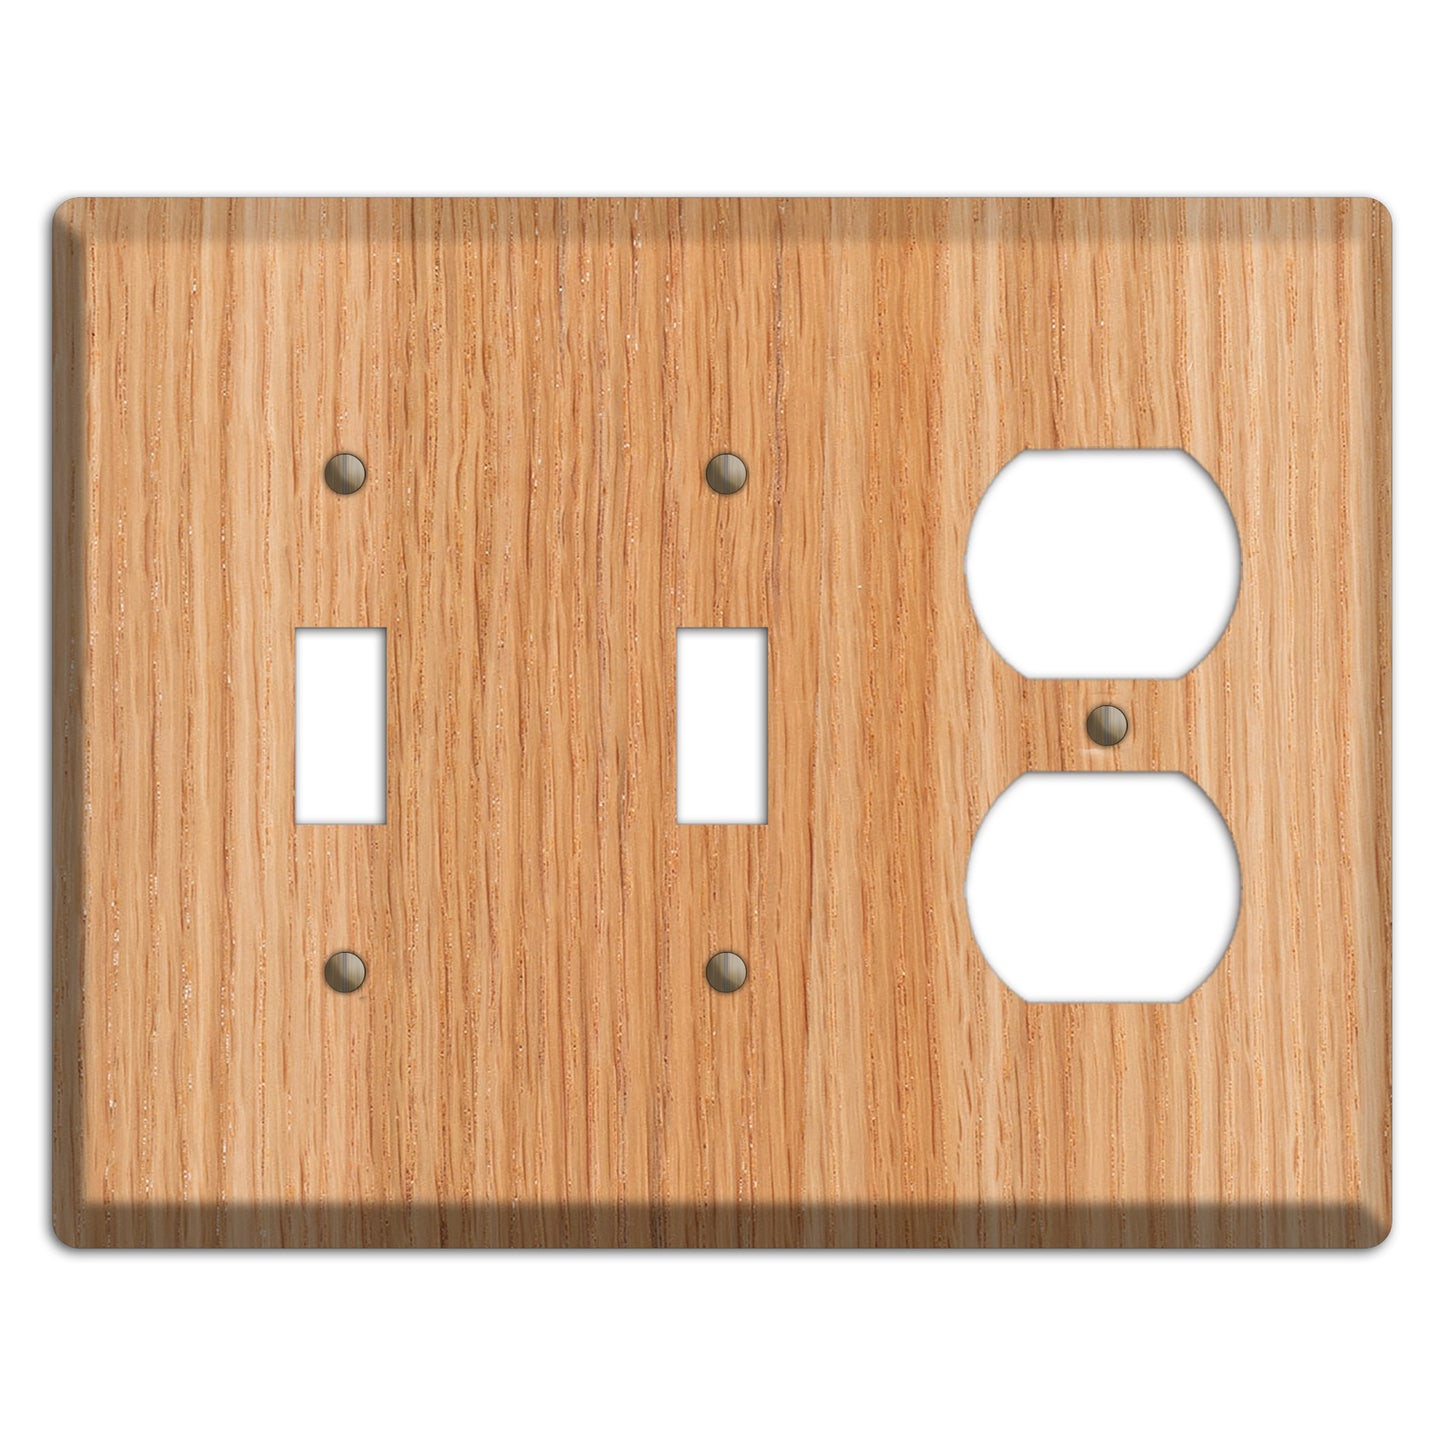 Unfinished Red Oak Wood 2 Toggle / Duplex Outlet Cover Plate